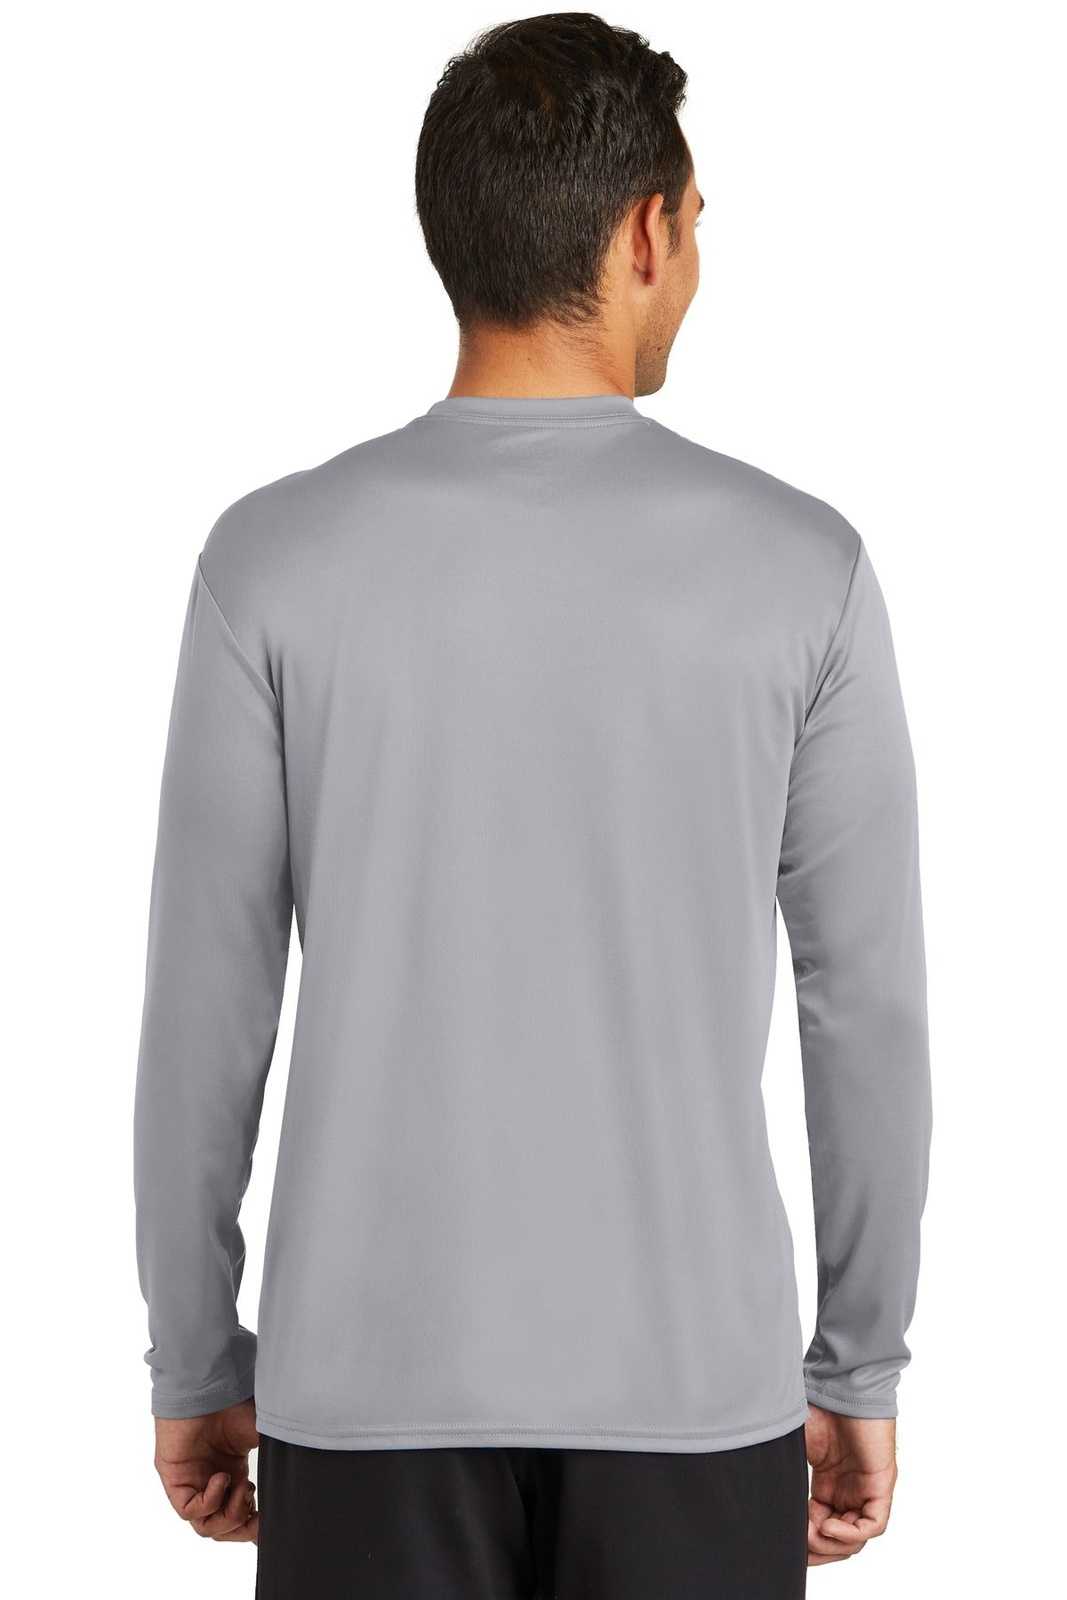 Port &amp; Company PC380LS Long Sleeve Performance Tee - Silver - HIT a Double - 2